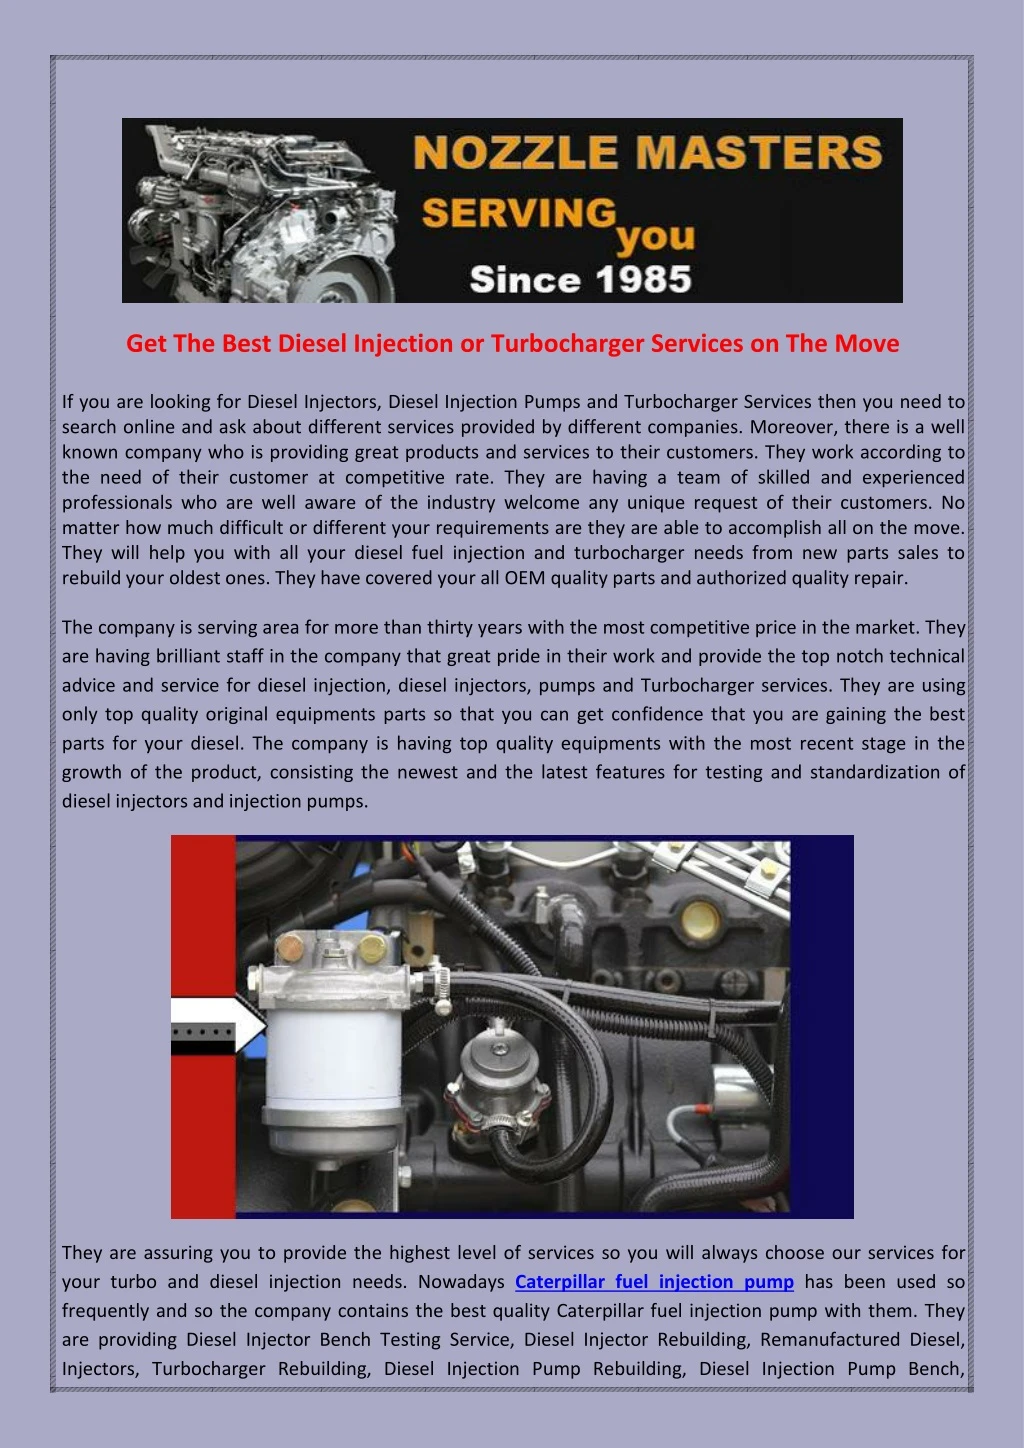 get the best diesel injection or turbocharger